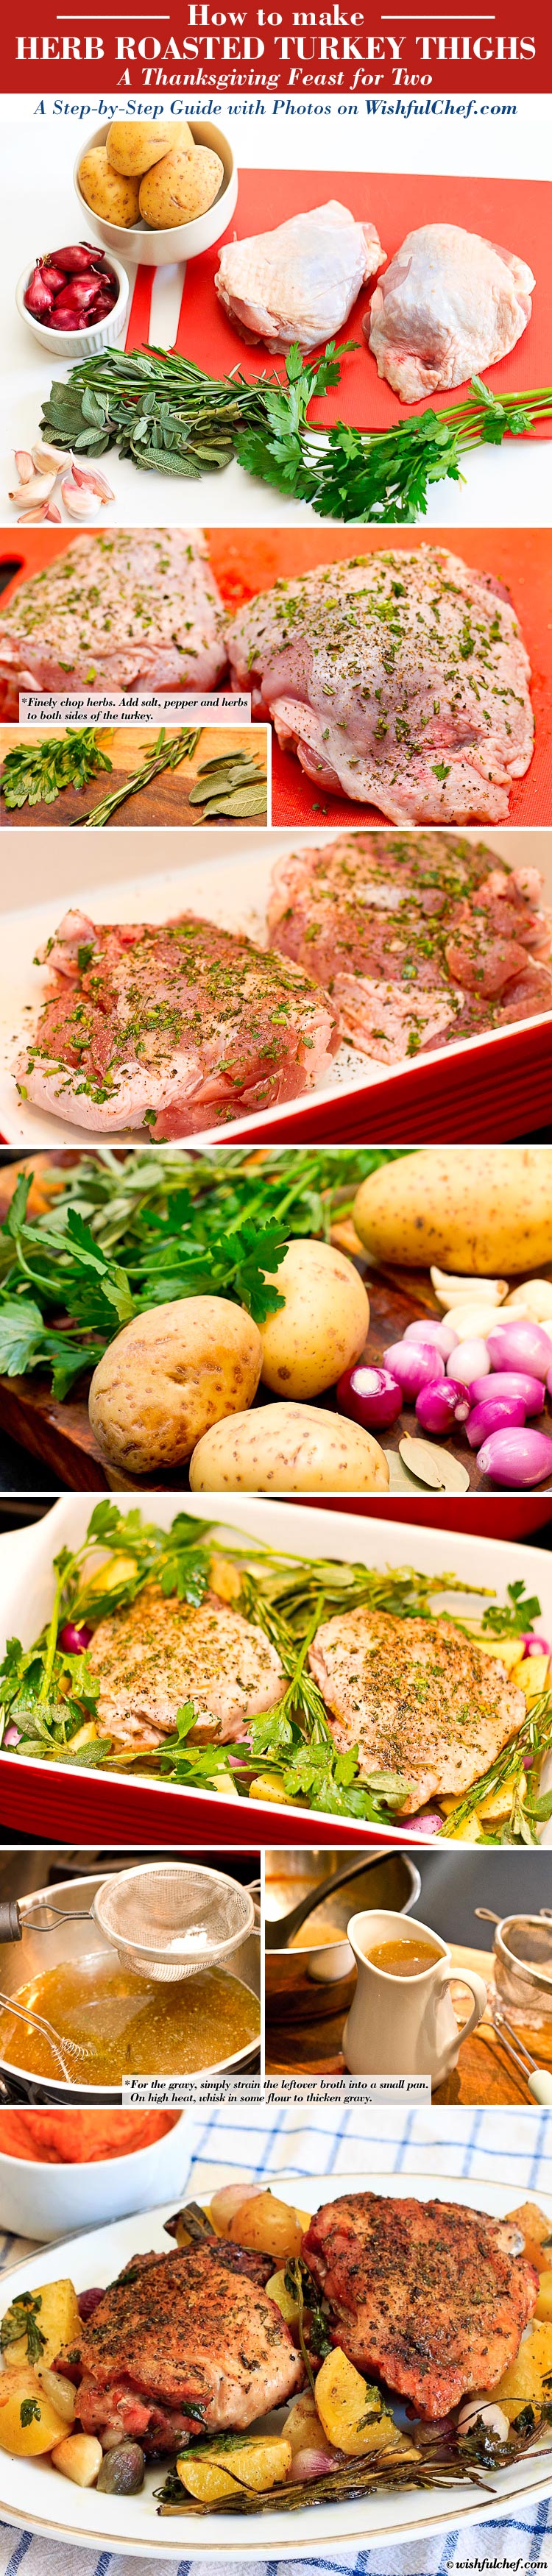 Step-by-Step: Herb Roasted Turkey Thighs – A Thanksgiving Feast for Two